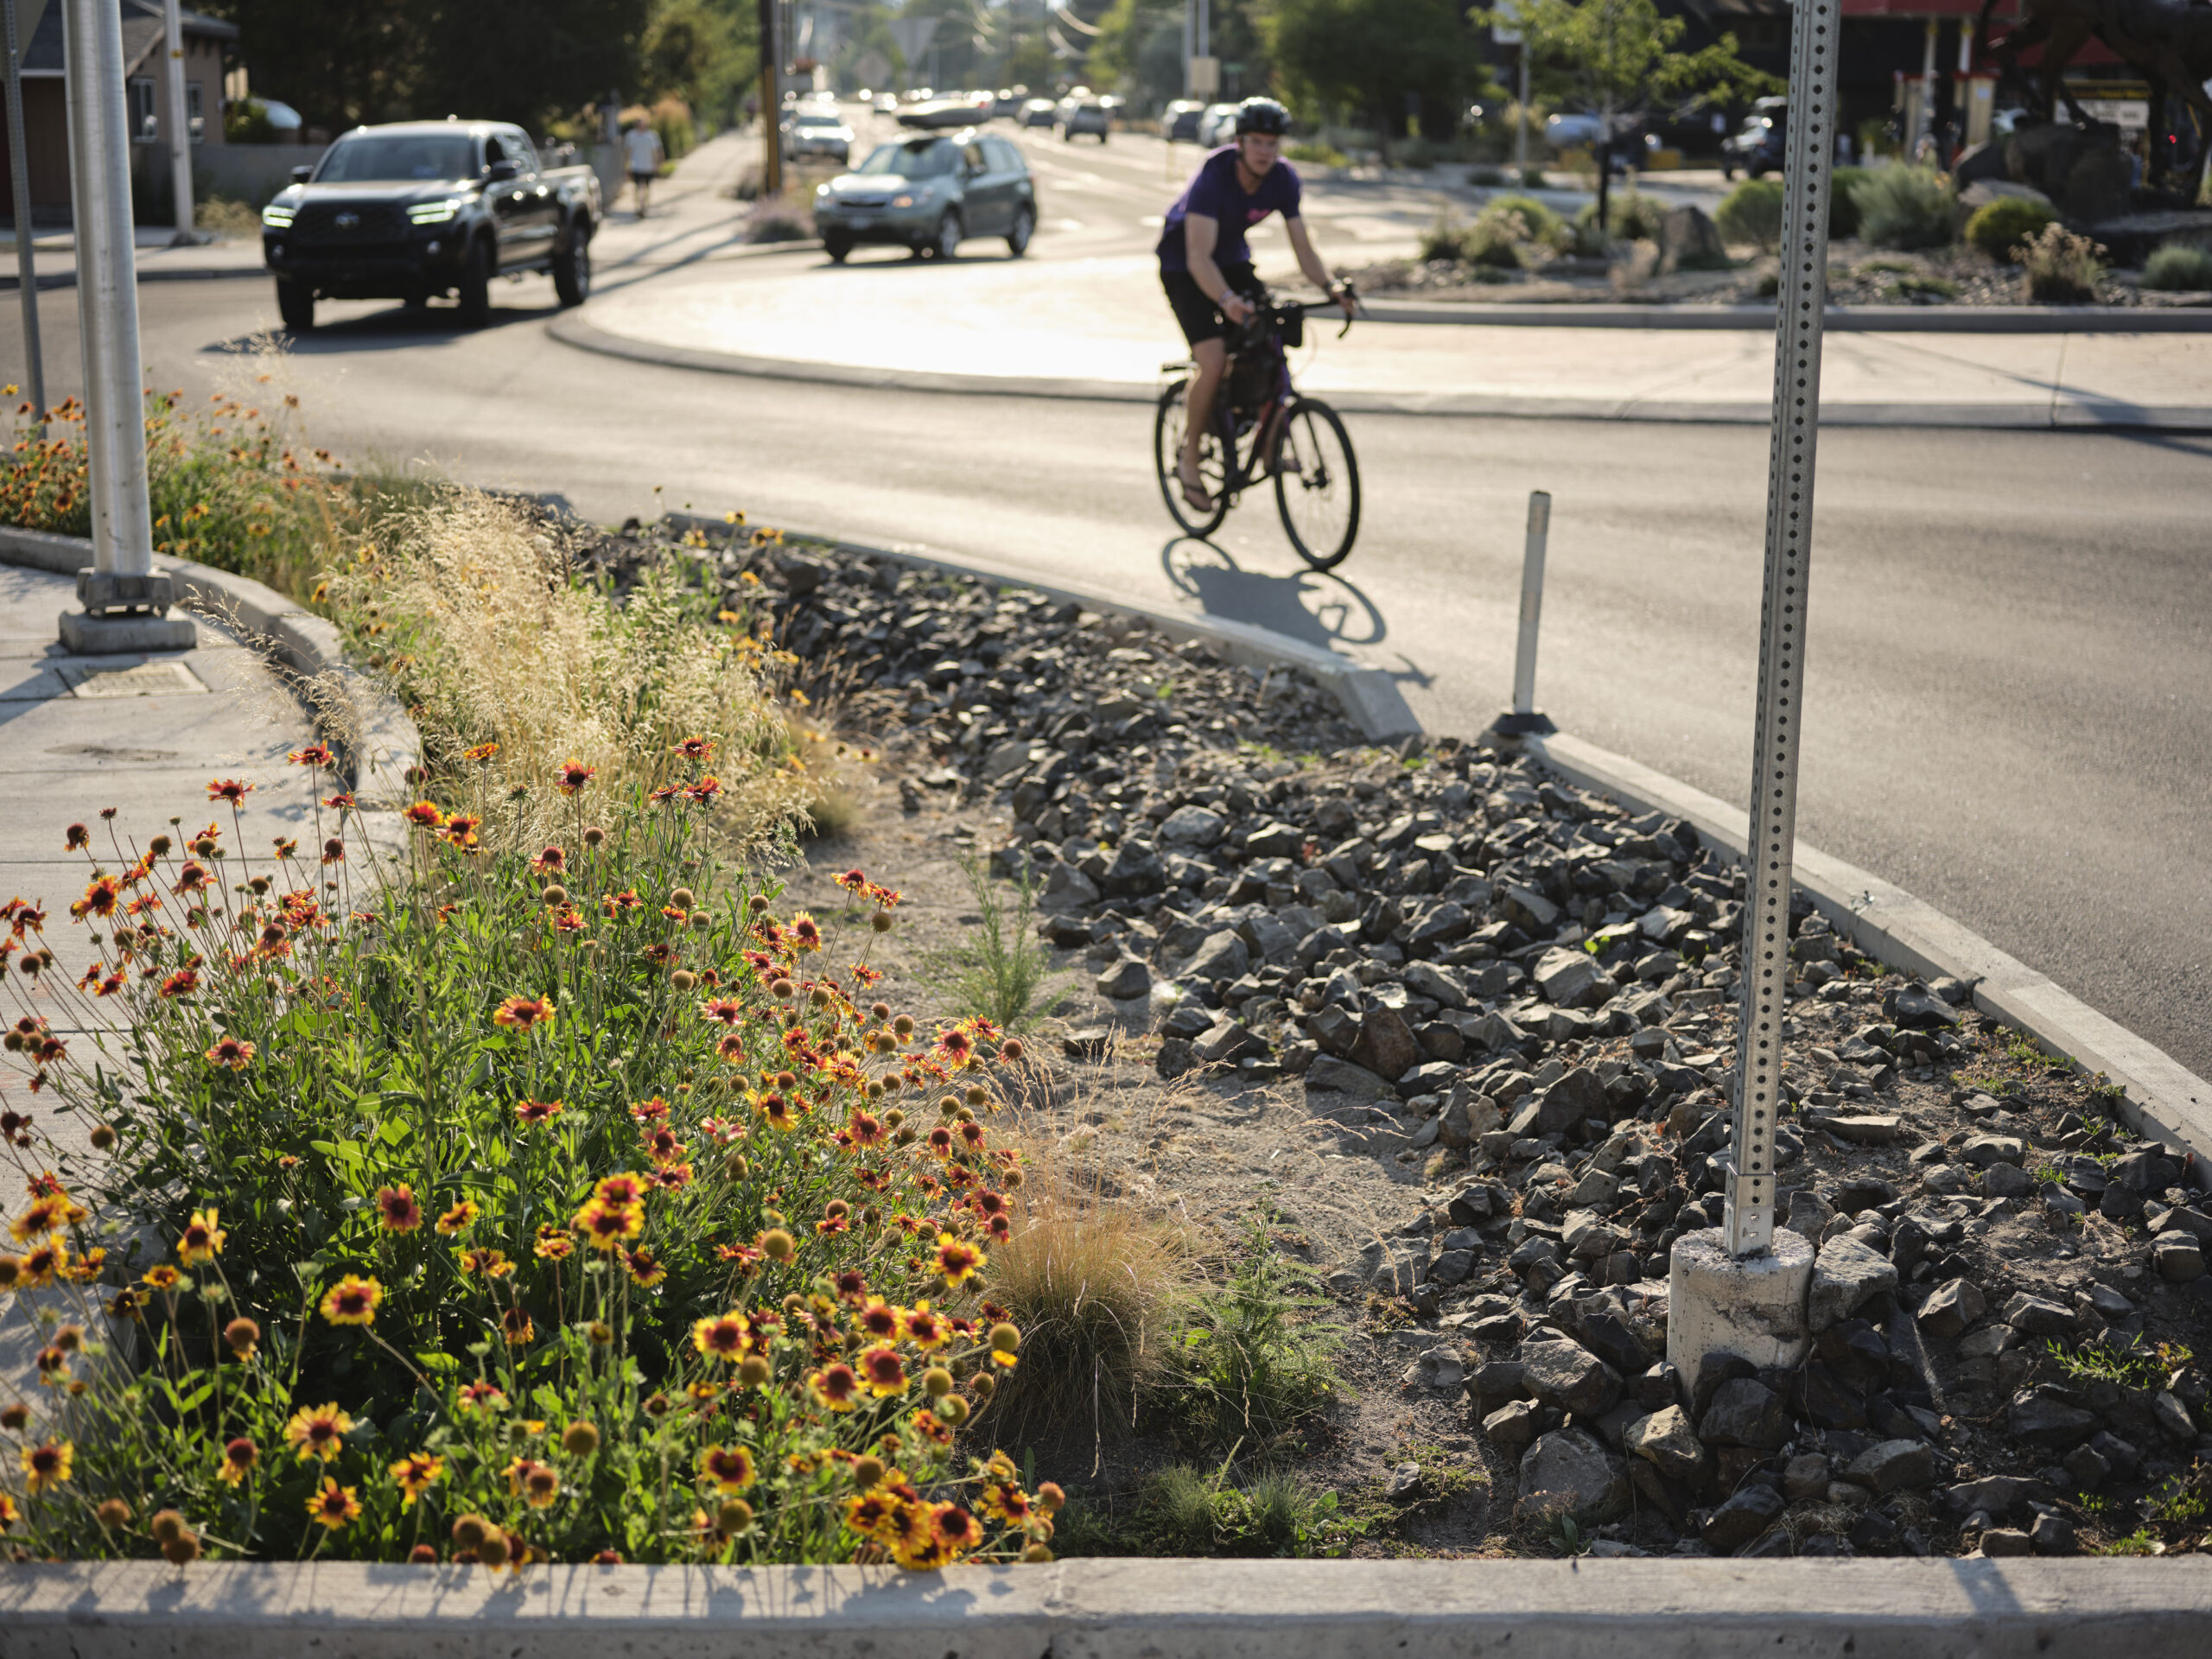 A planter with a roundabout, bicyclist, and vehicles in the background.